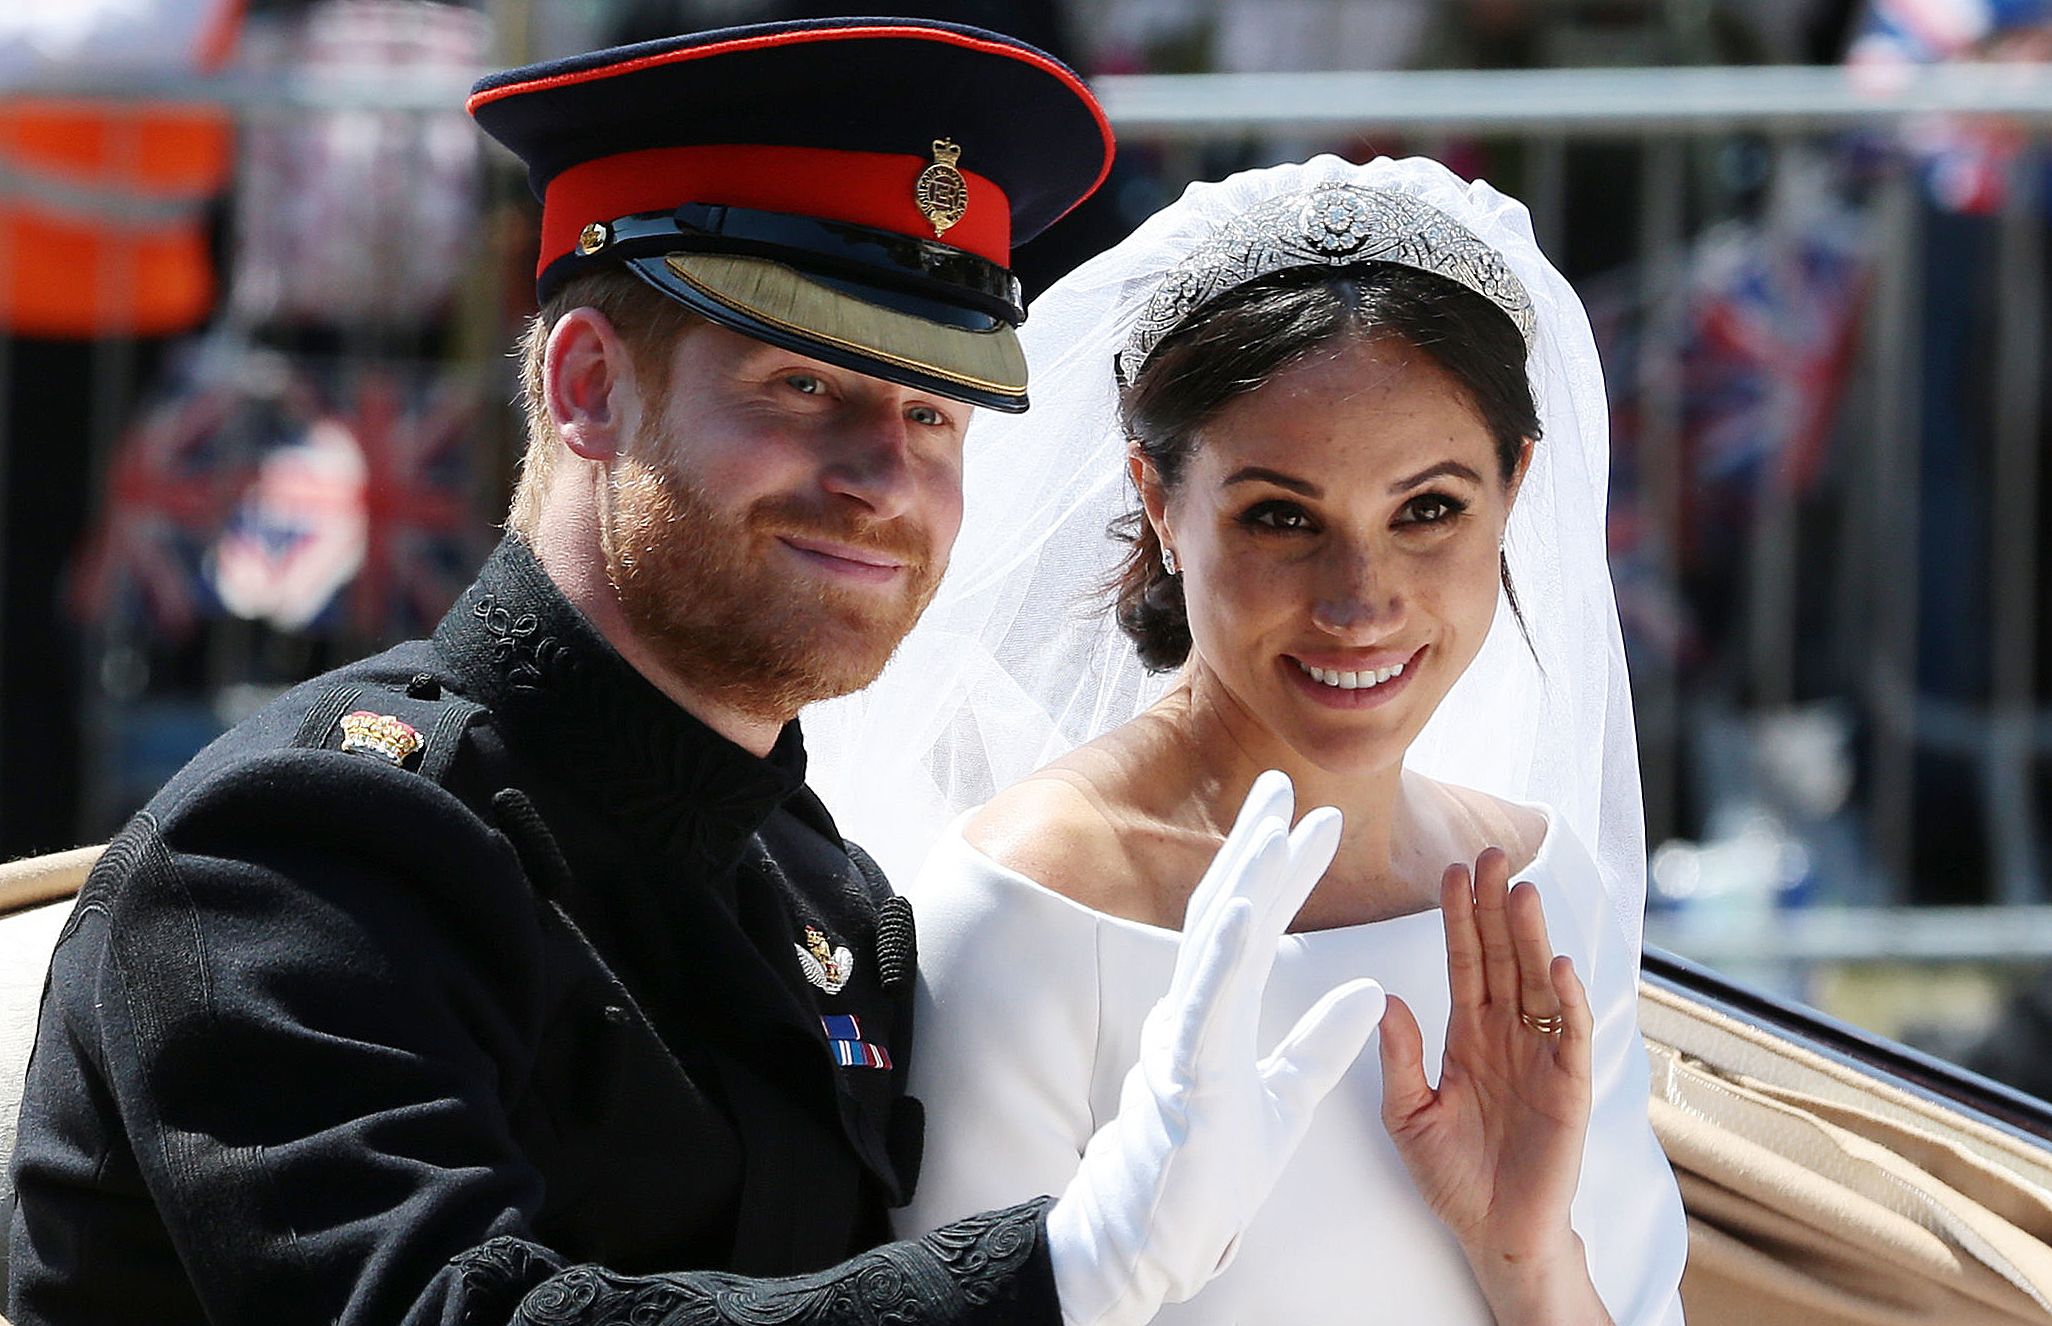 Prince Harry 'sparked tension' over Meghan Markle's Wedding Tiara and The Rift Among the Royal Family.